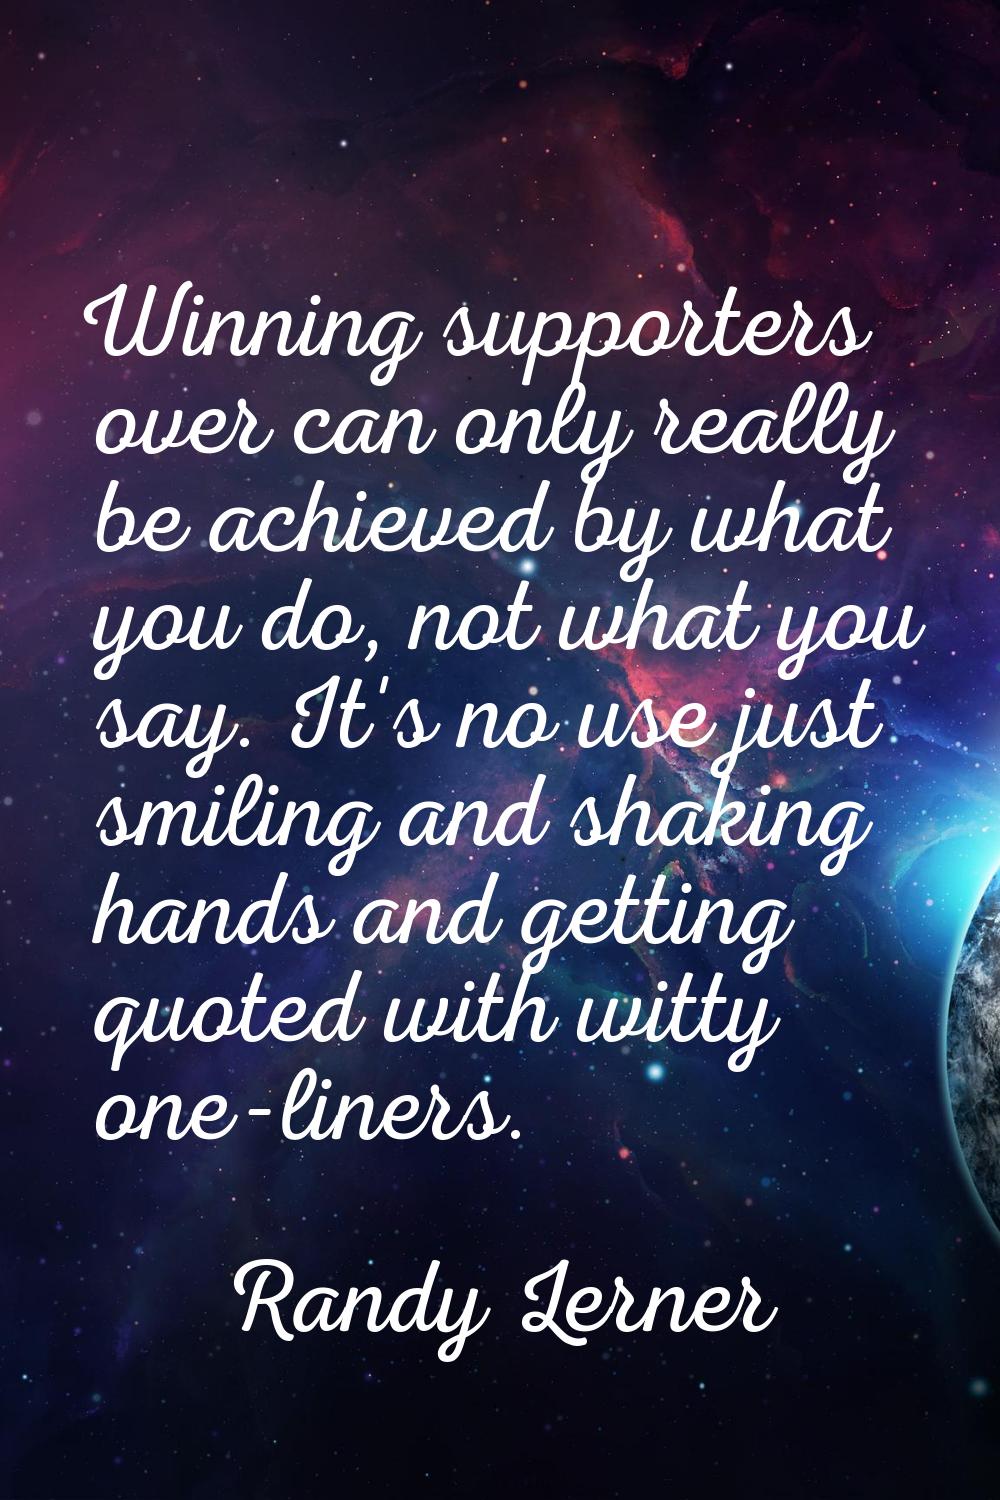 Winning supporters over can only really be achieved by what you do, not what you say. It's no use j